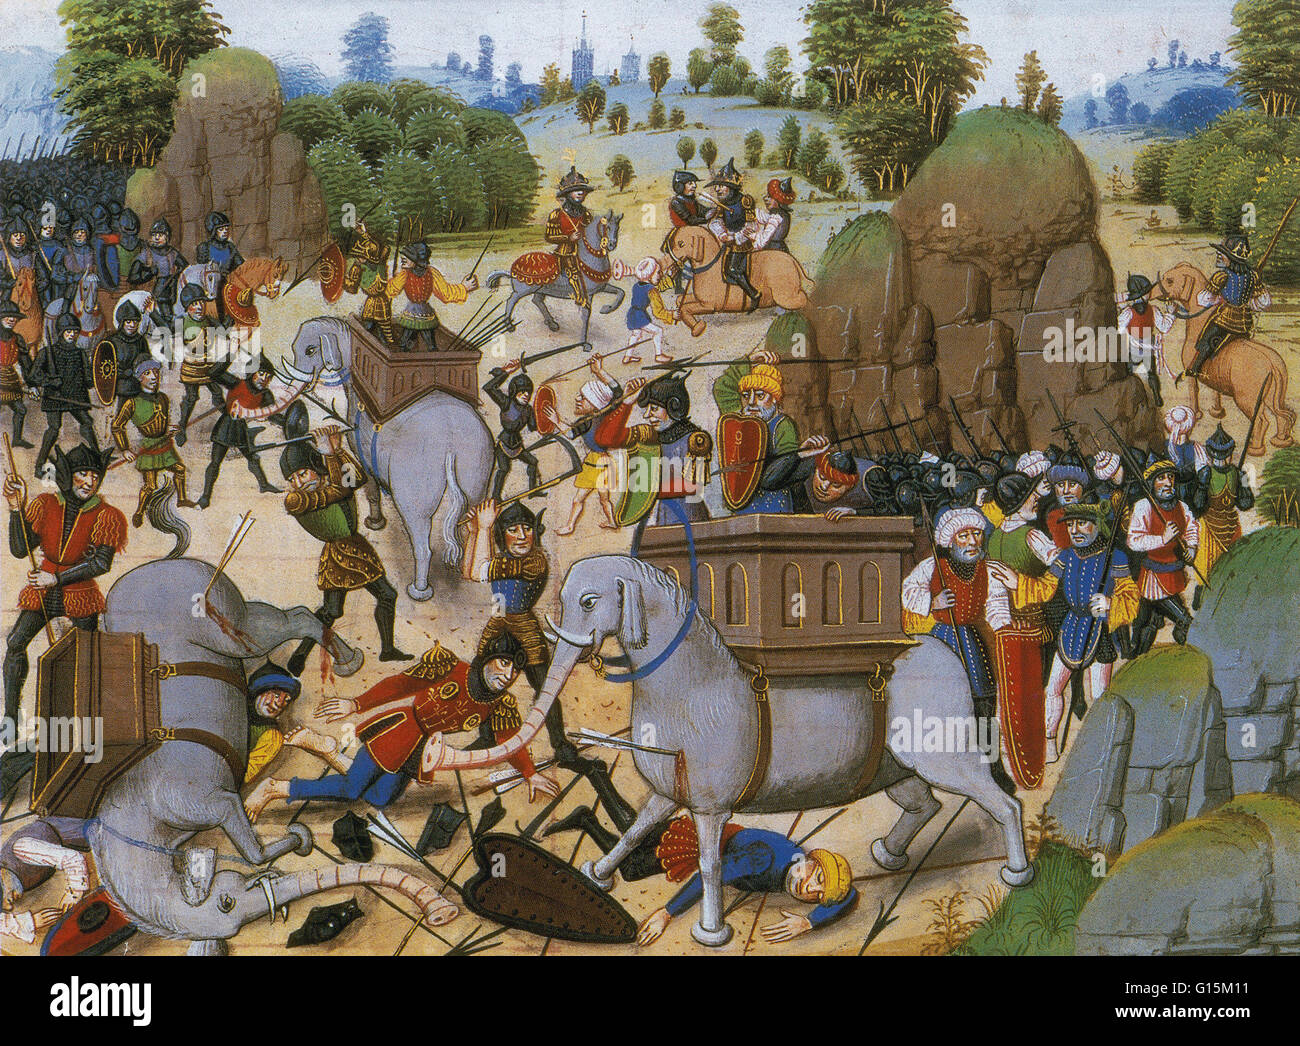 Image taken from, Story of Alexander the Great, 14th century. The battle scene in India is illustrated in the style of the Middle Ages. Alexander III of Macedon (356-323 BC), commonly known as Alexander the Great, was a Greek king of Macedon. Alexander wa Stock Photo